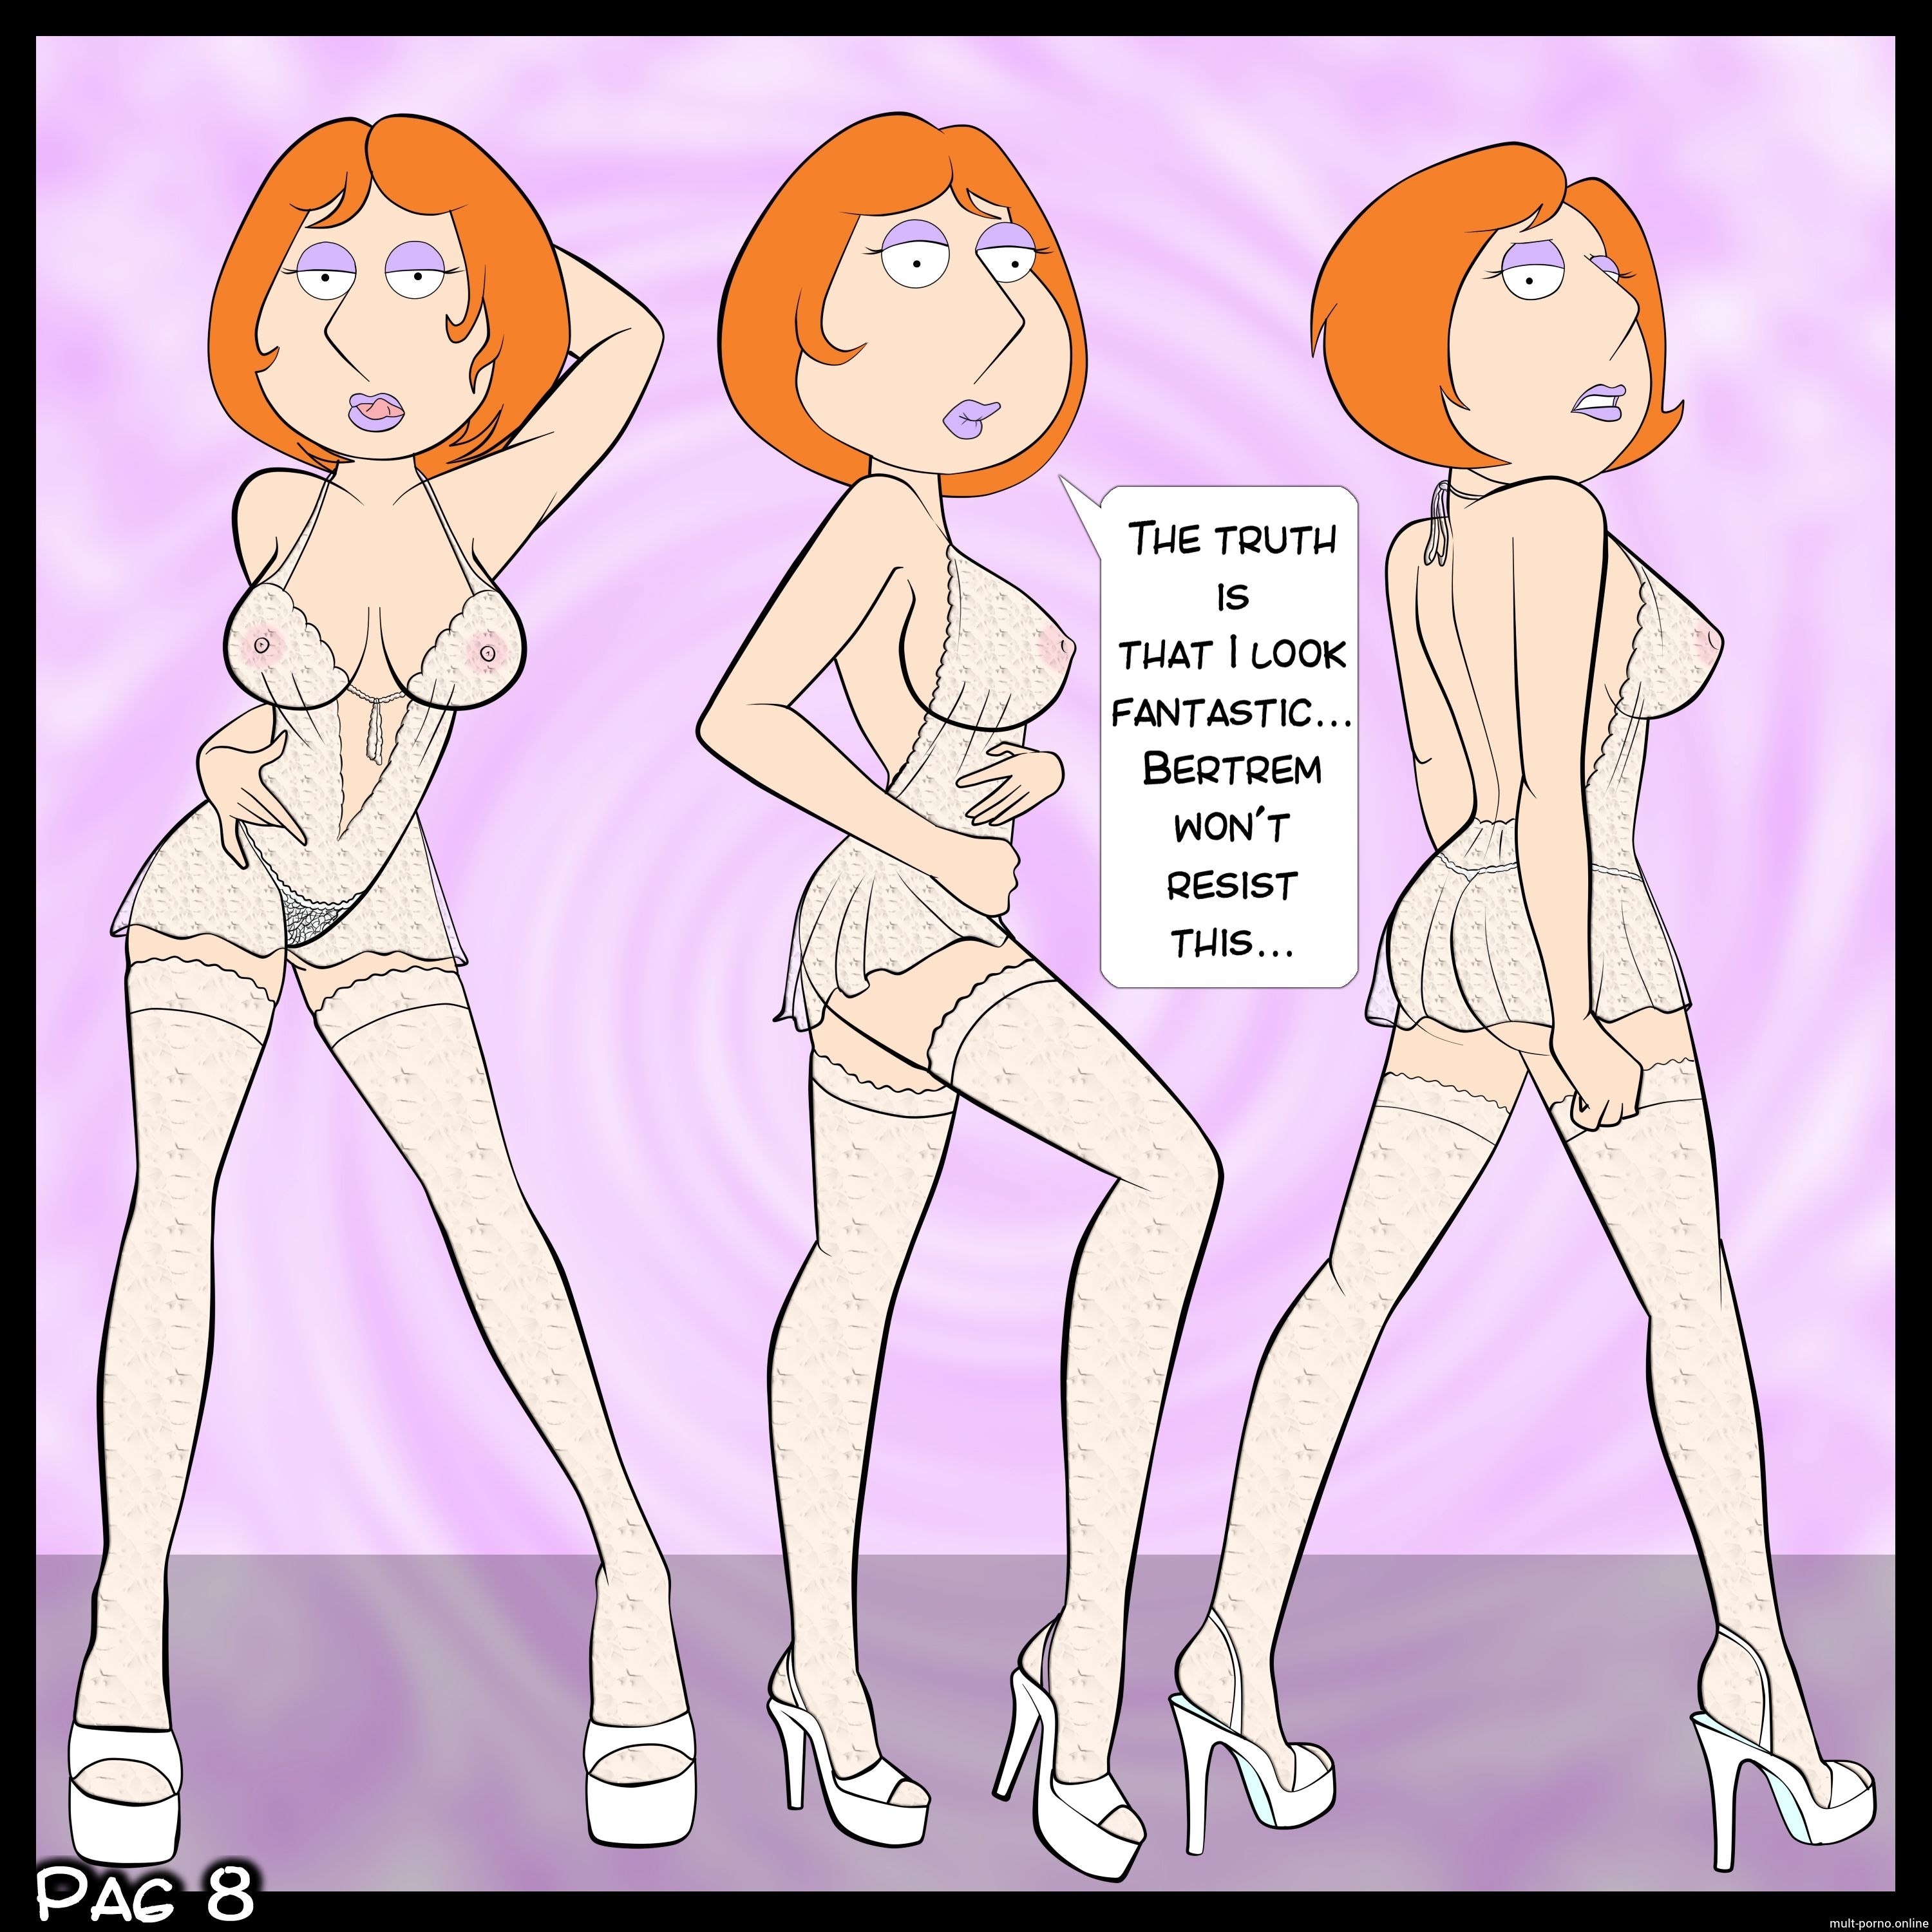 Evening sex ended with cum on redhead Lois' face (+porn comics)